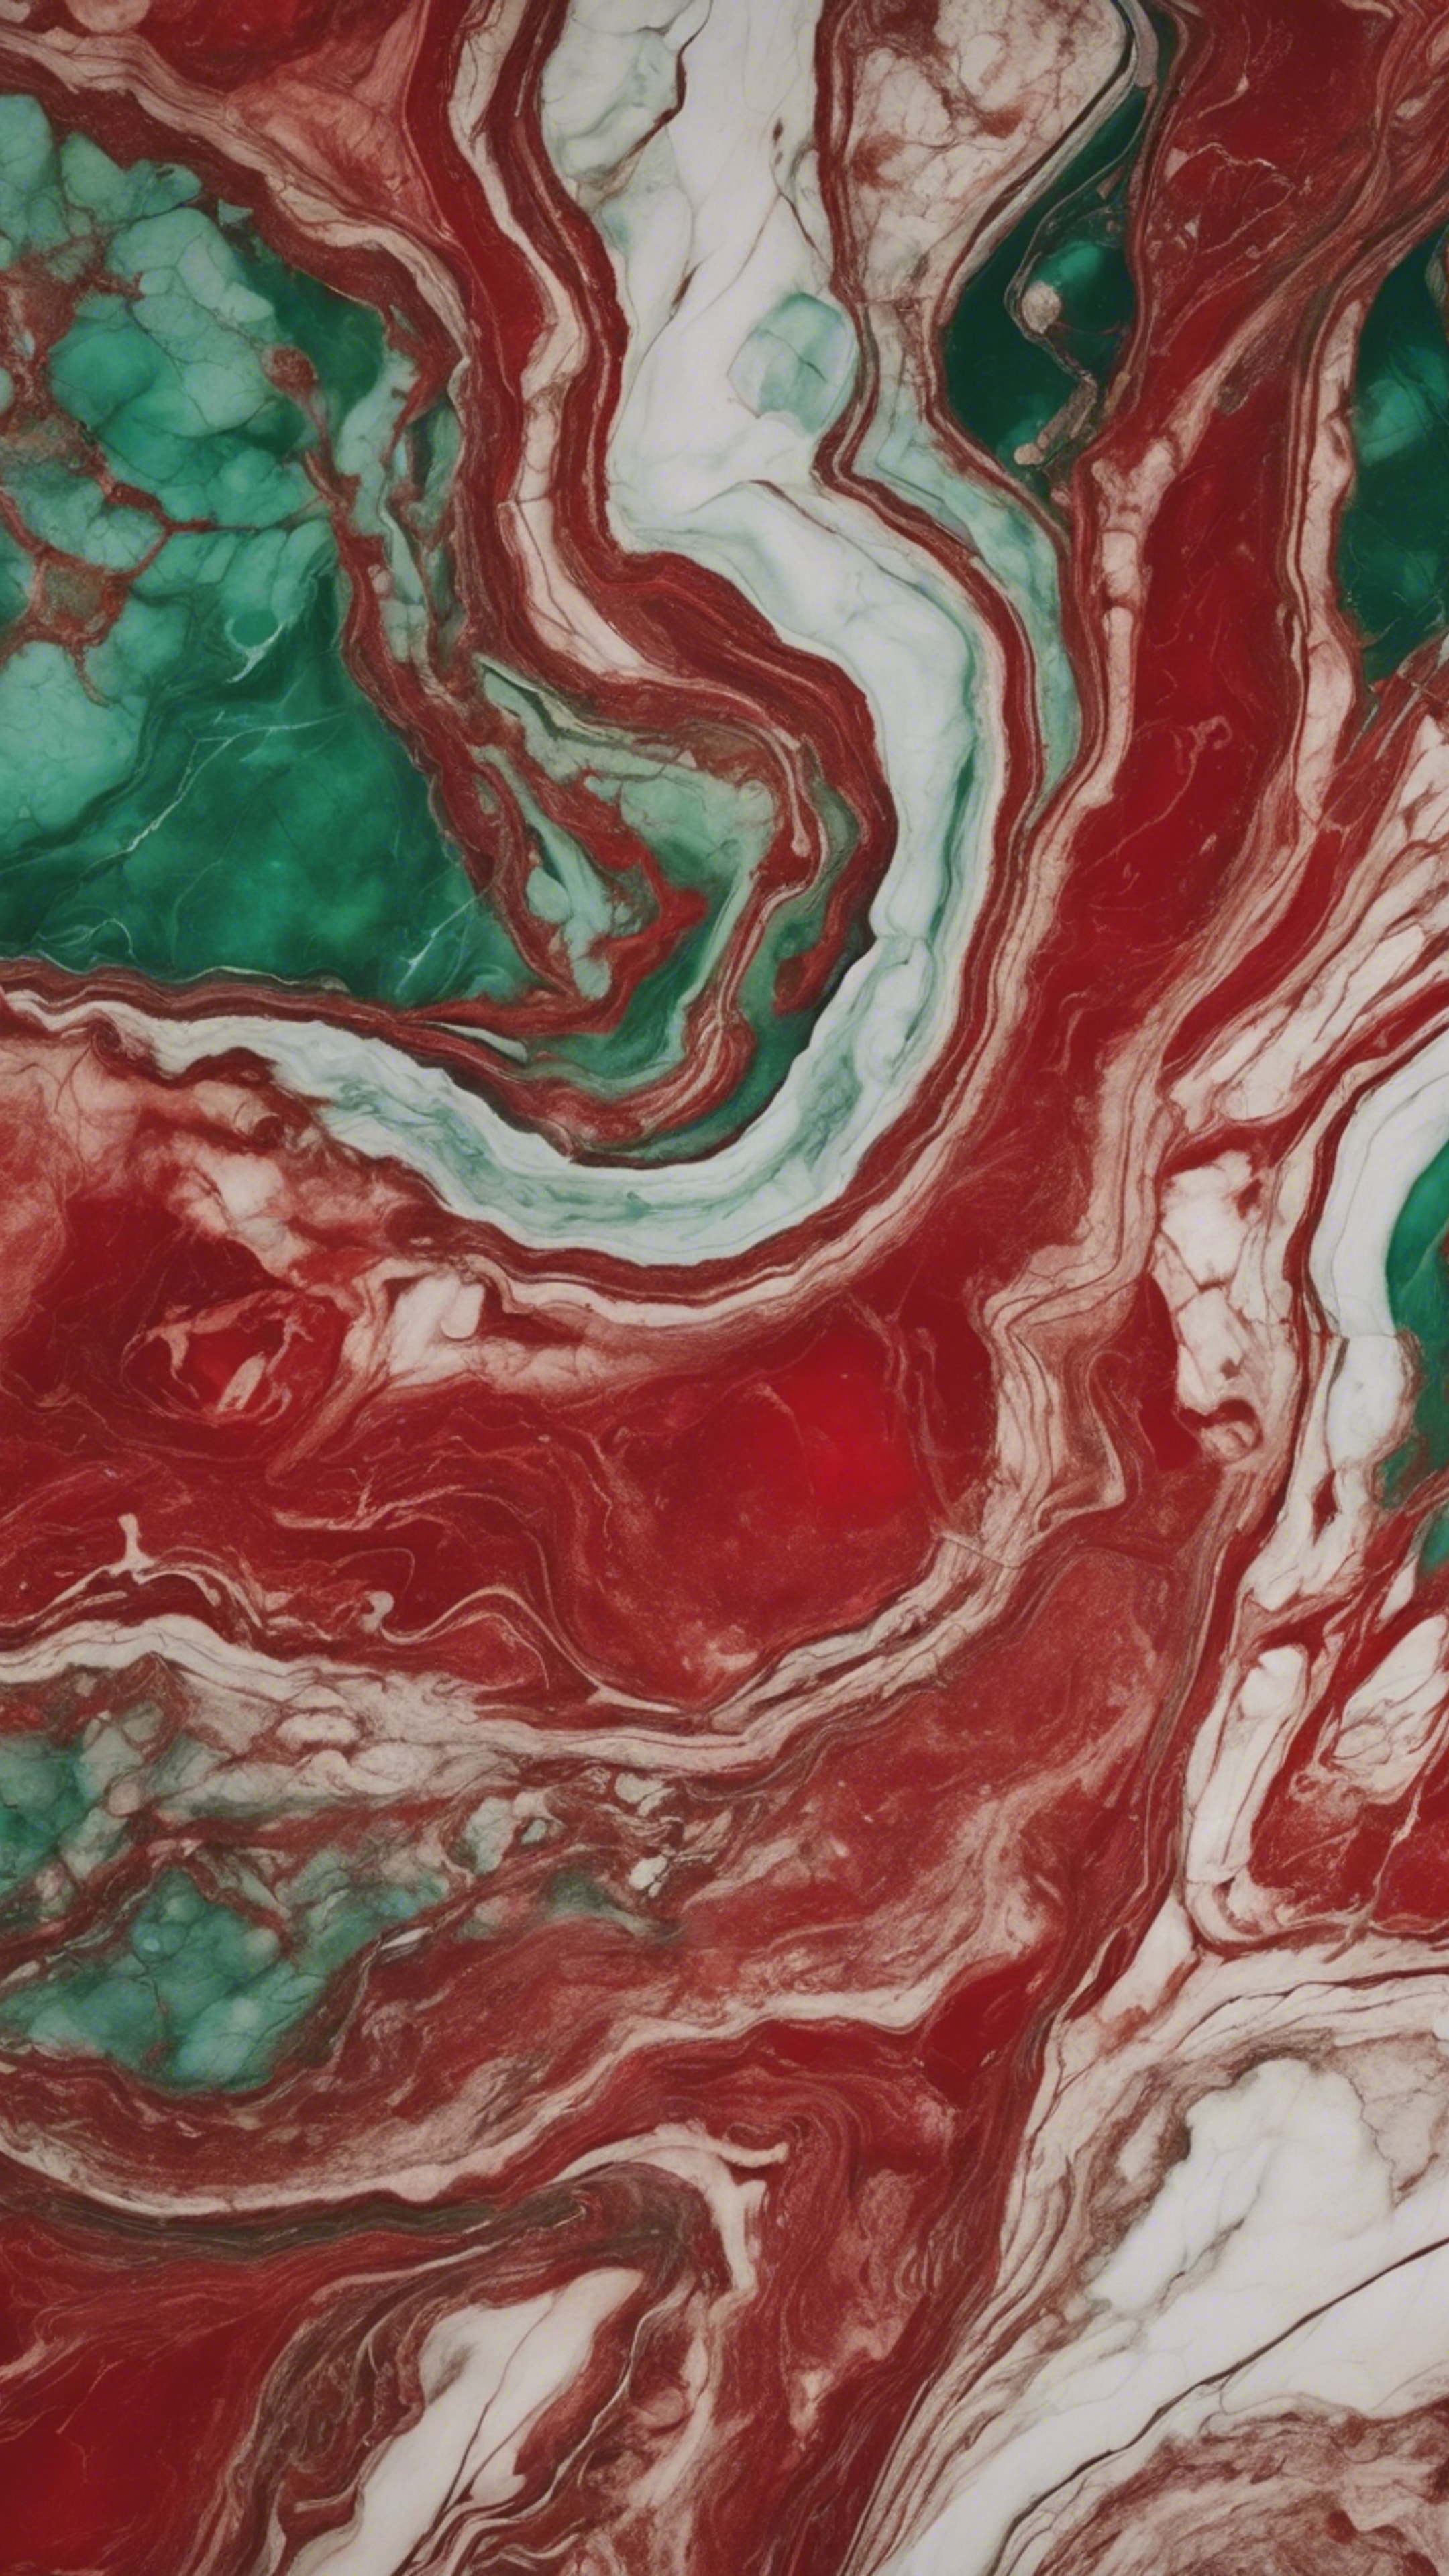 Elegant red and green marble pattern with veins running across. Tapet[edb4d3fbd47c4b239d5a]